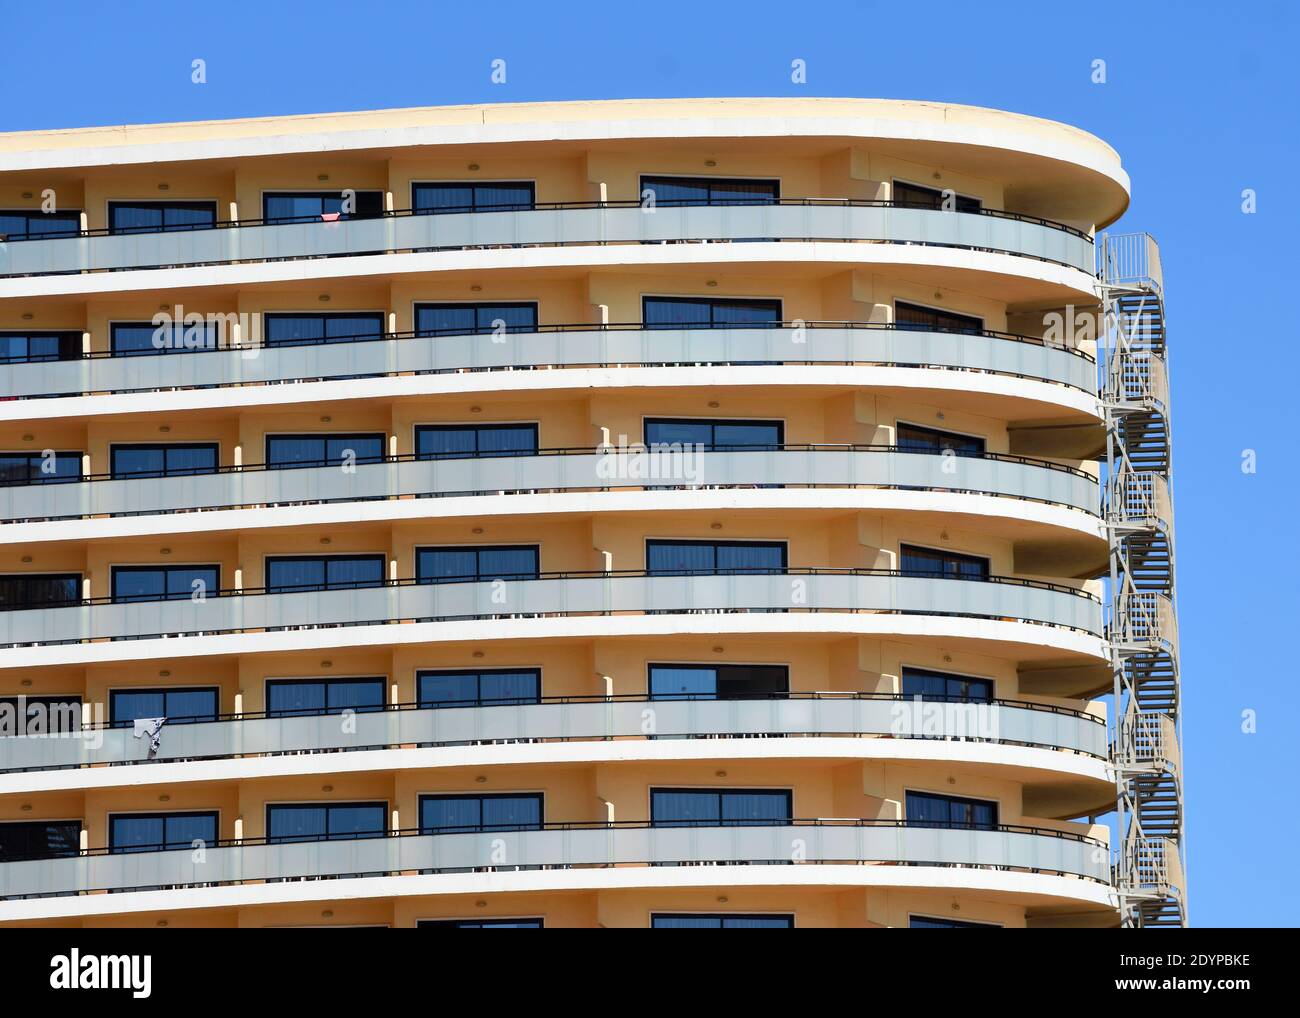 Hotel balconies pattern - and blue sky Stock Photo